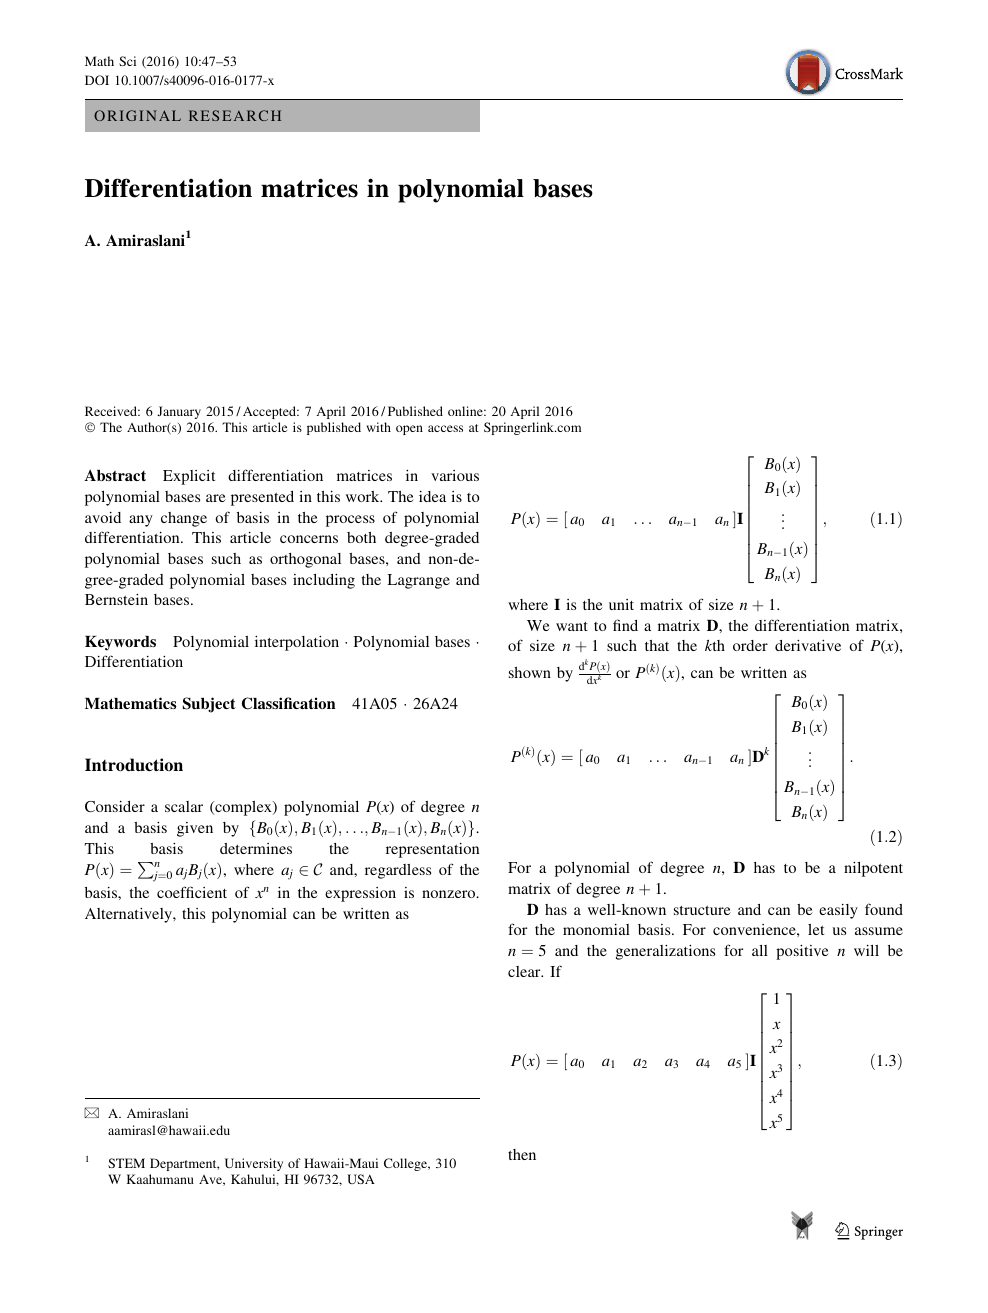 Differentiation Matrices In Polynomial Bases Topic Of Research Paper In Mathematics Download Scholarly Article Pdf And Read For Free On Cyberleninka Open Science Hub